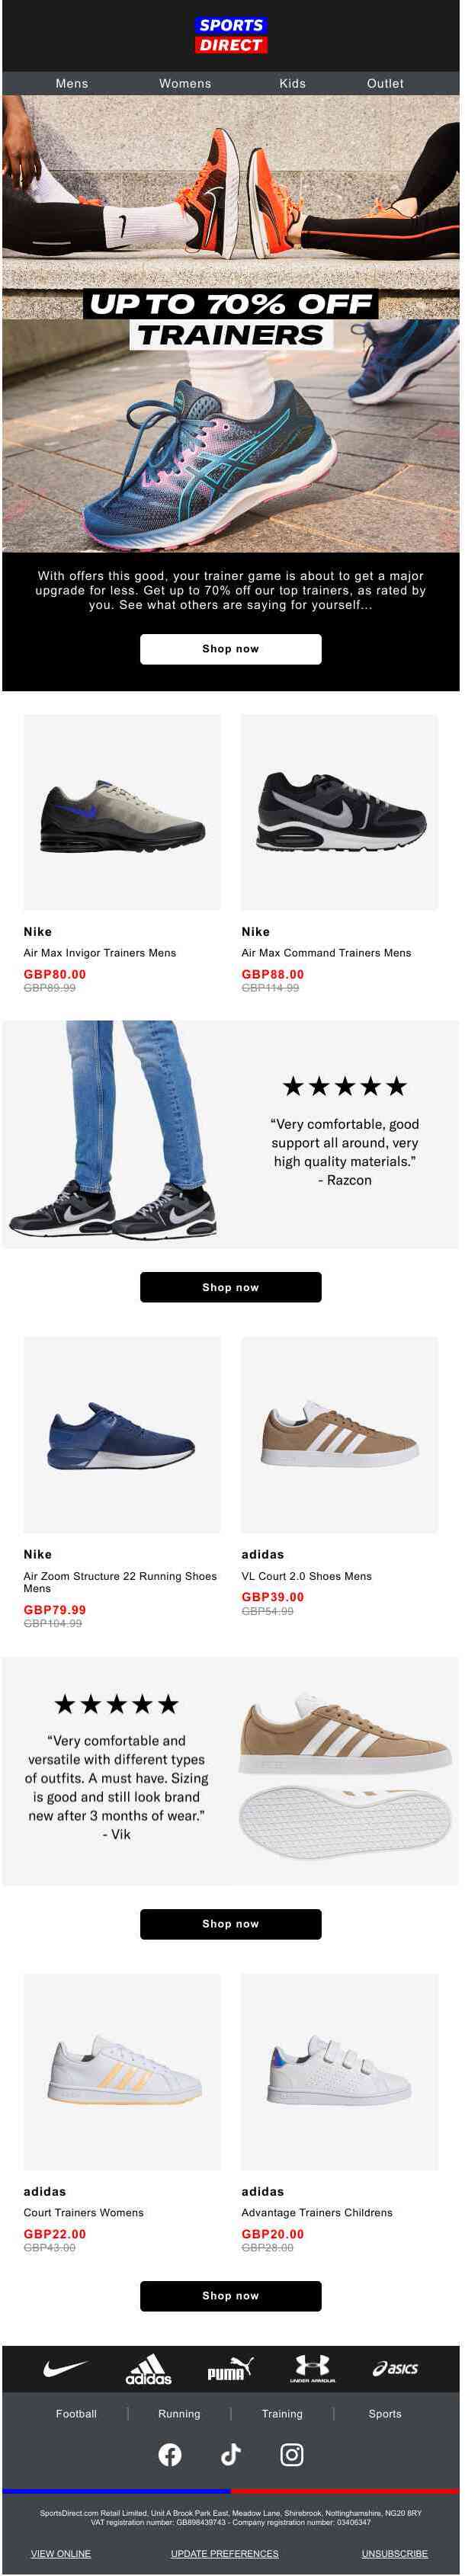 ⭐ Up to 70% off: Top rated trainers ⭐